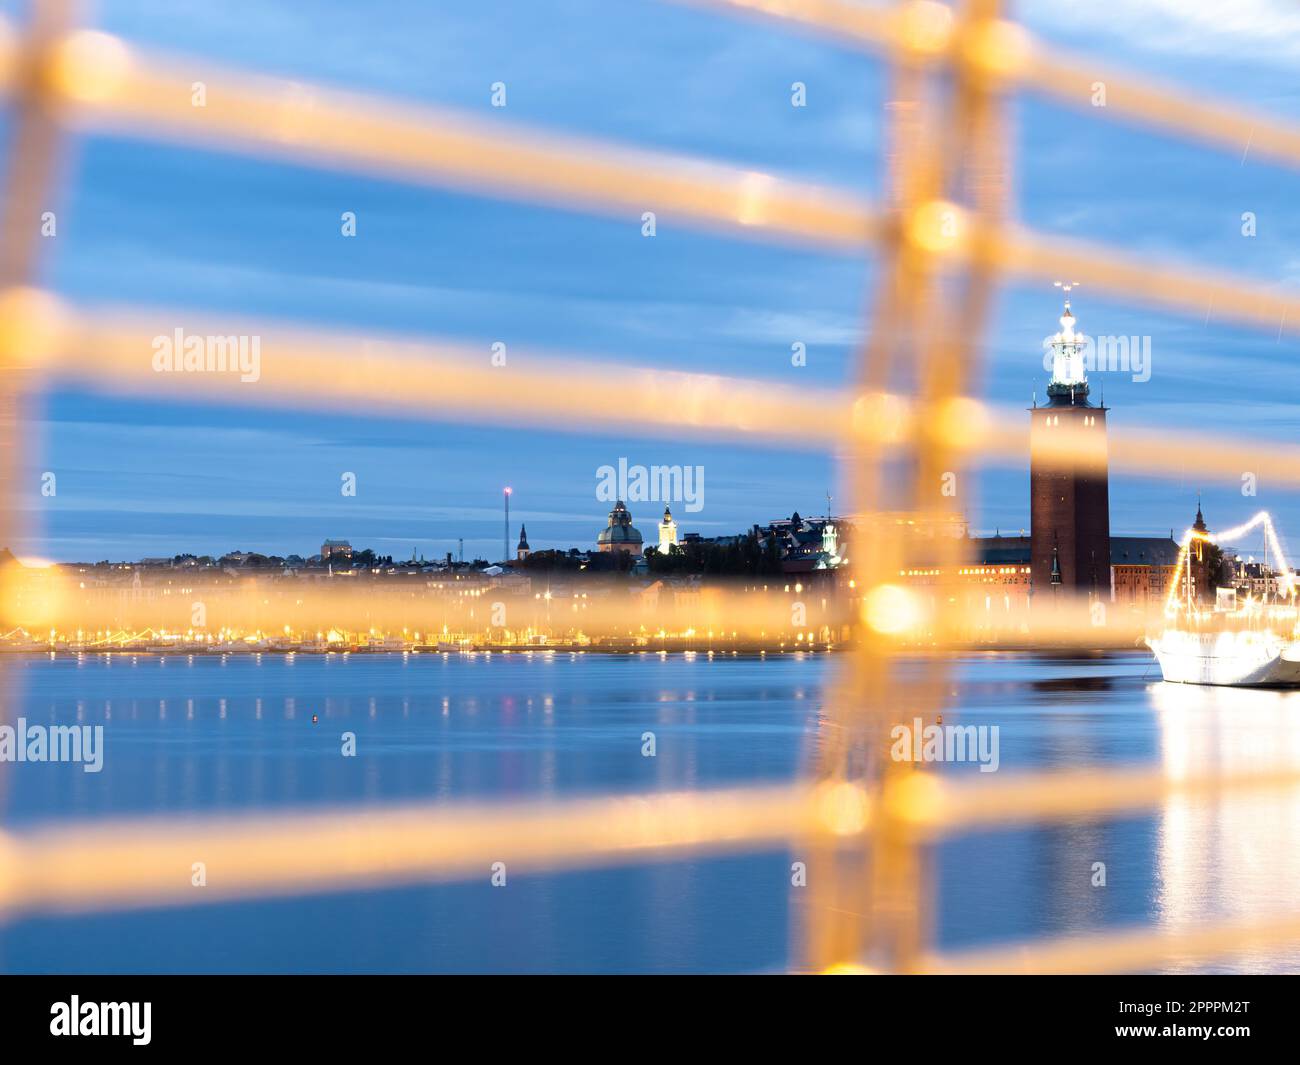 Stockholm, Sweden - 4 October, 2022: A blurred fence in front of a majestic city hall with a stunning motif stands tall, reflecting off the still wate Stock Photo